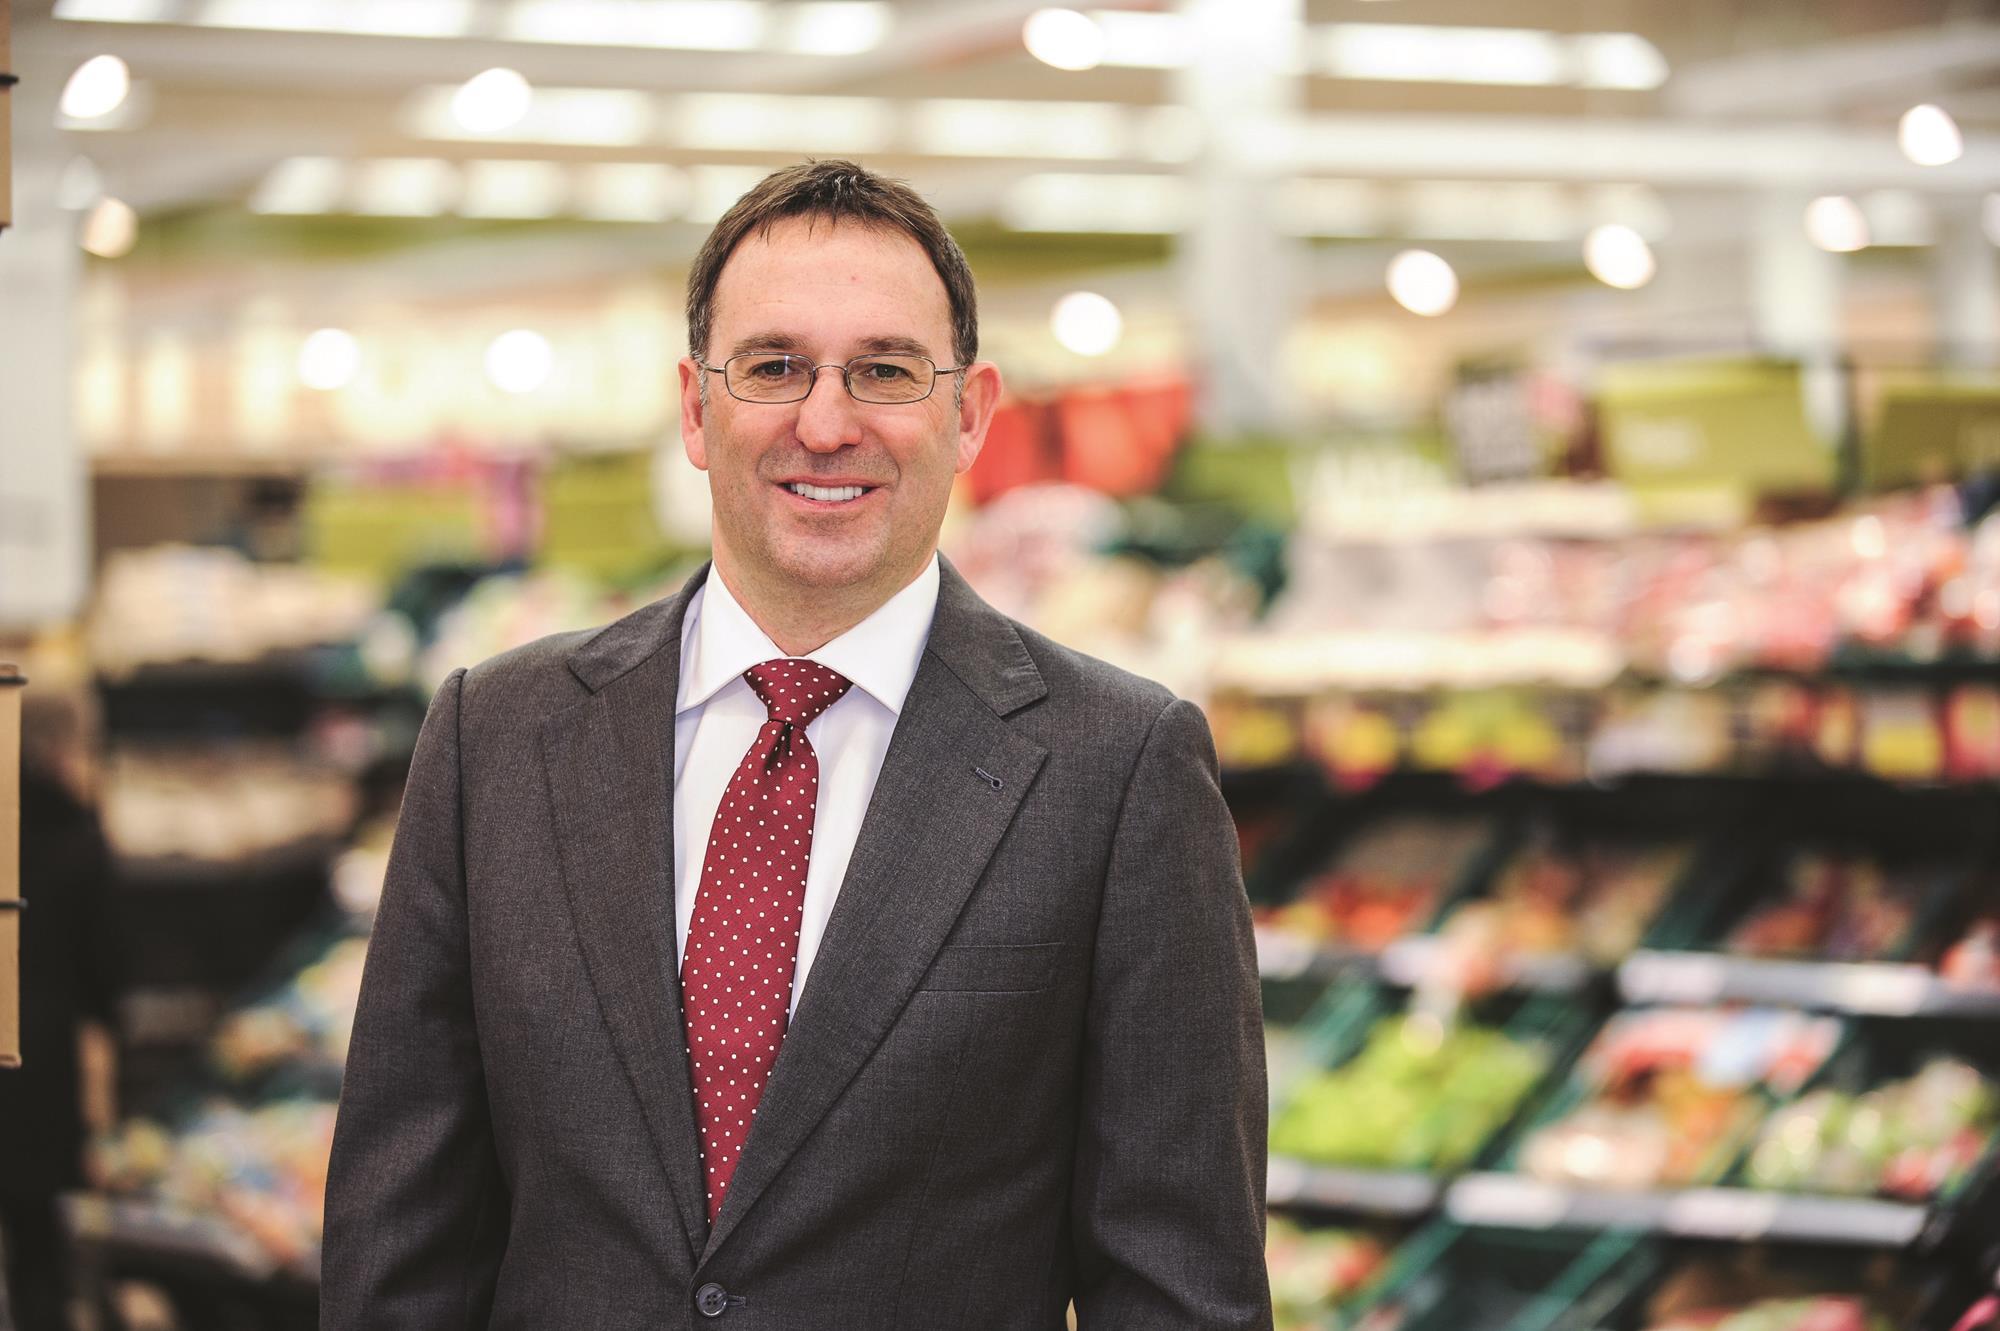 Interview: Chris Bush’s plan to turn Tesco into a brand of choice